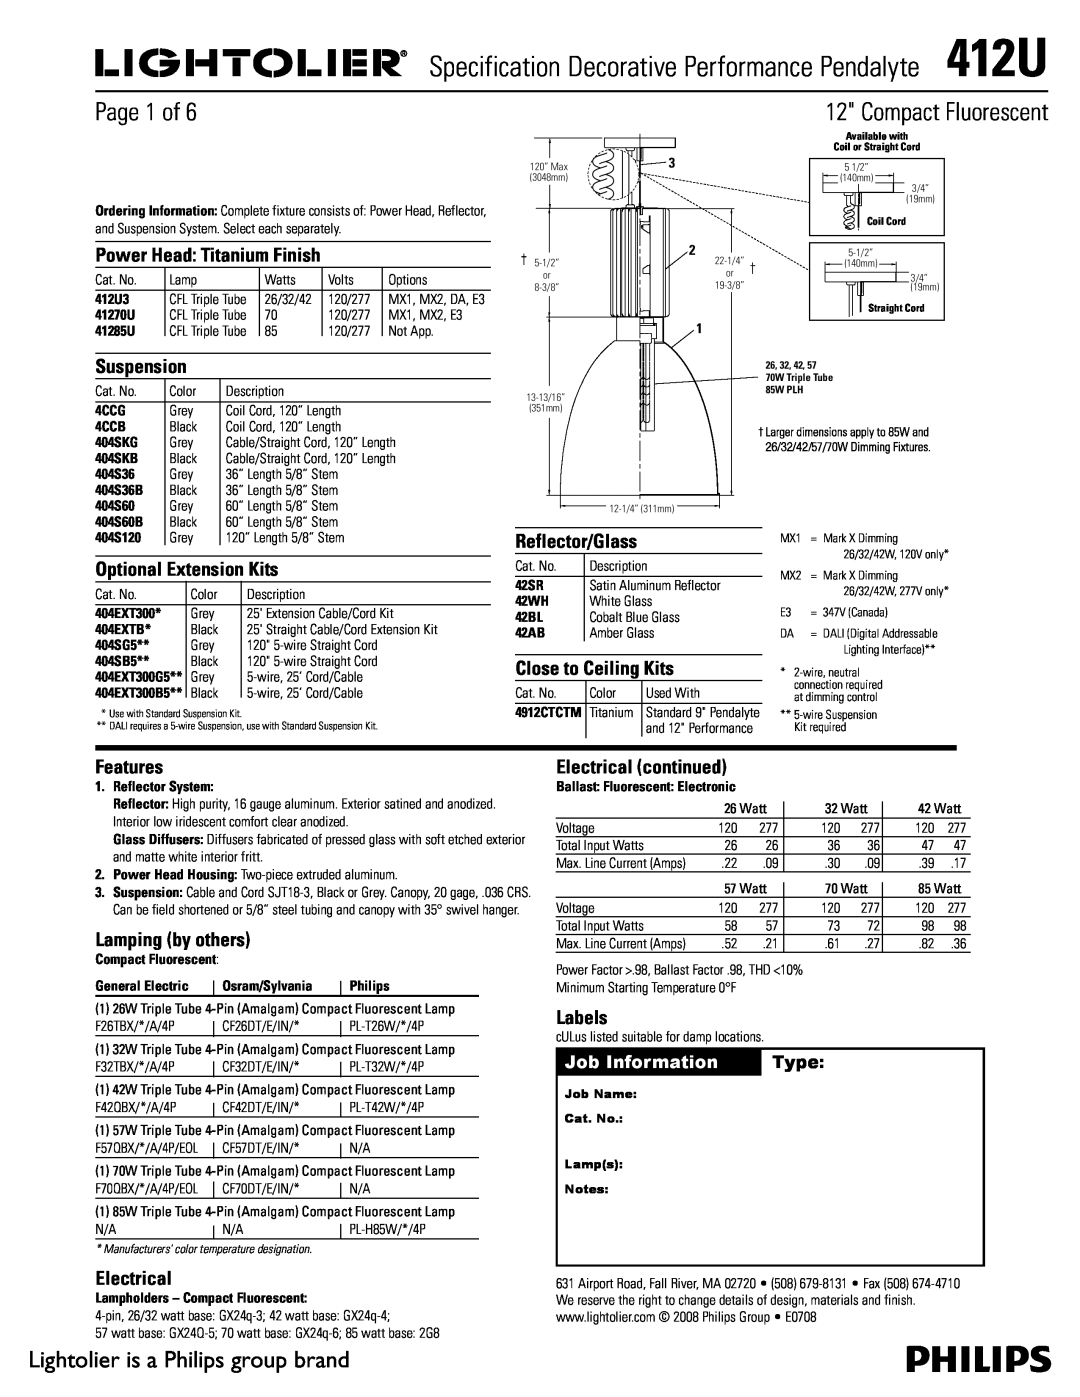 Lightolier 412U manual Page 1 of, Compact Fluorescent, Lightolier is a Philips group brand, Power Head Titanium Finish 